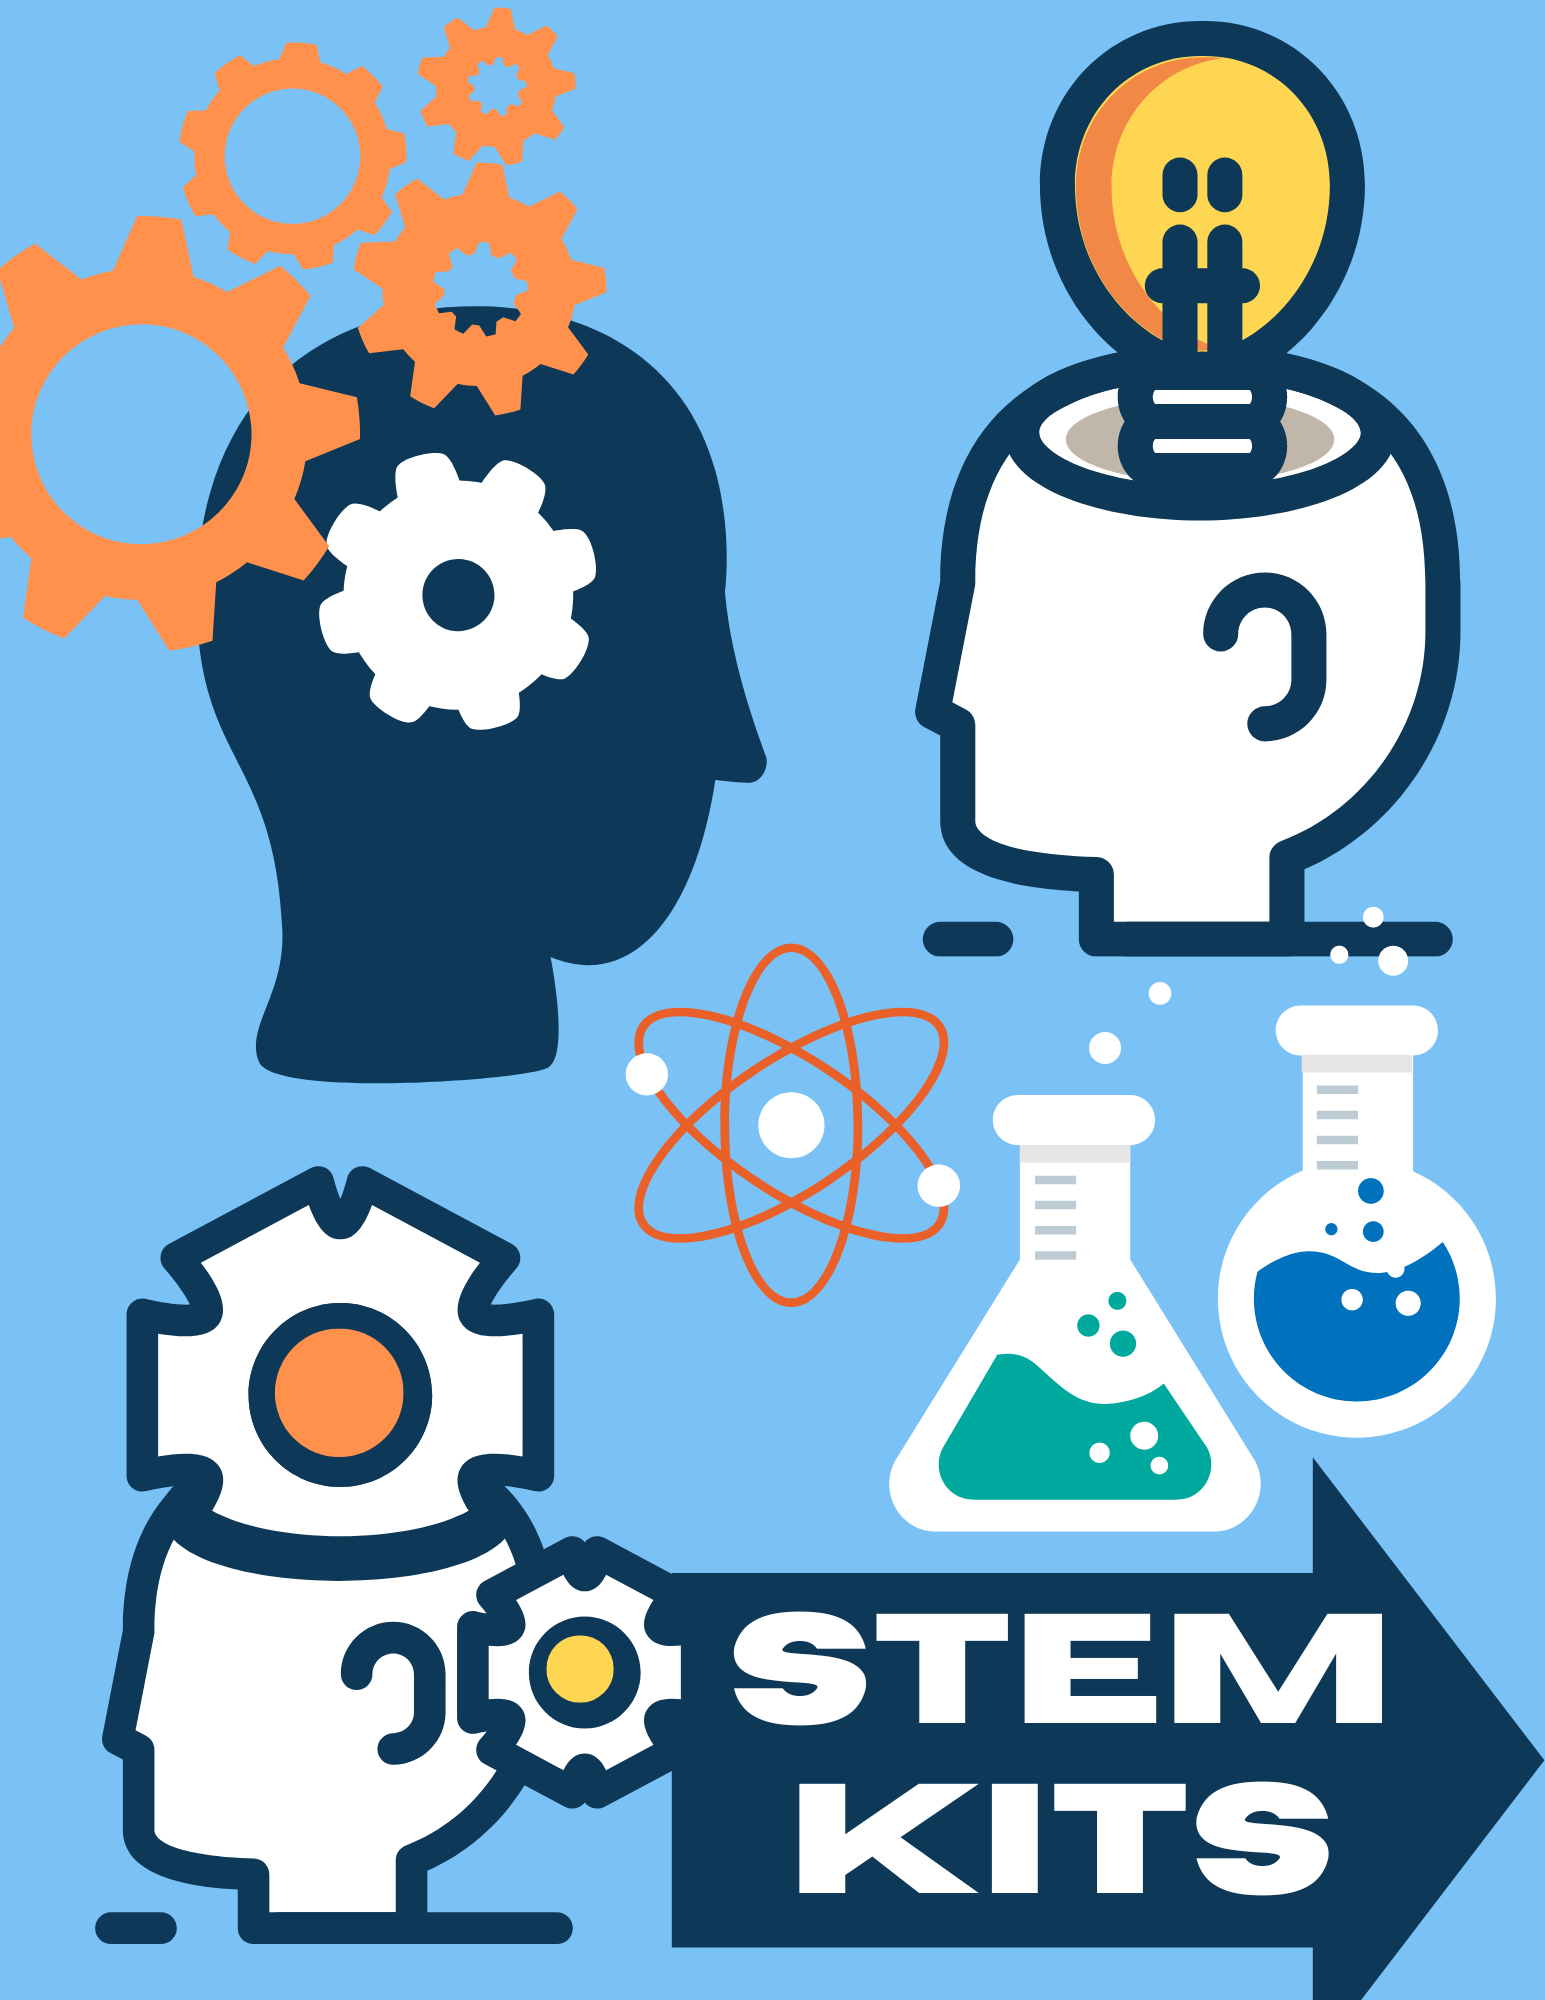 Graphics of heads, gears, chem set, atom/molecule, light bulb to indicate STEM learning